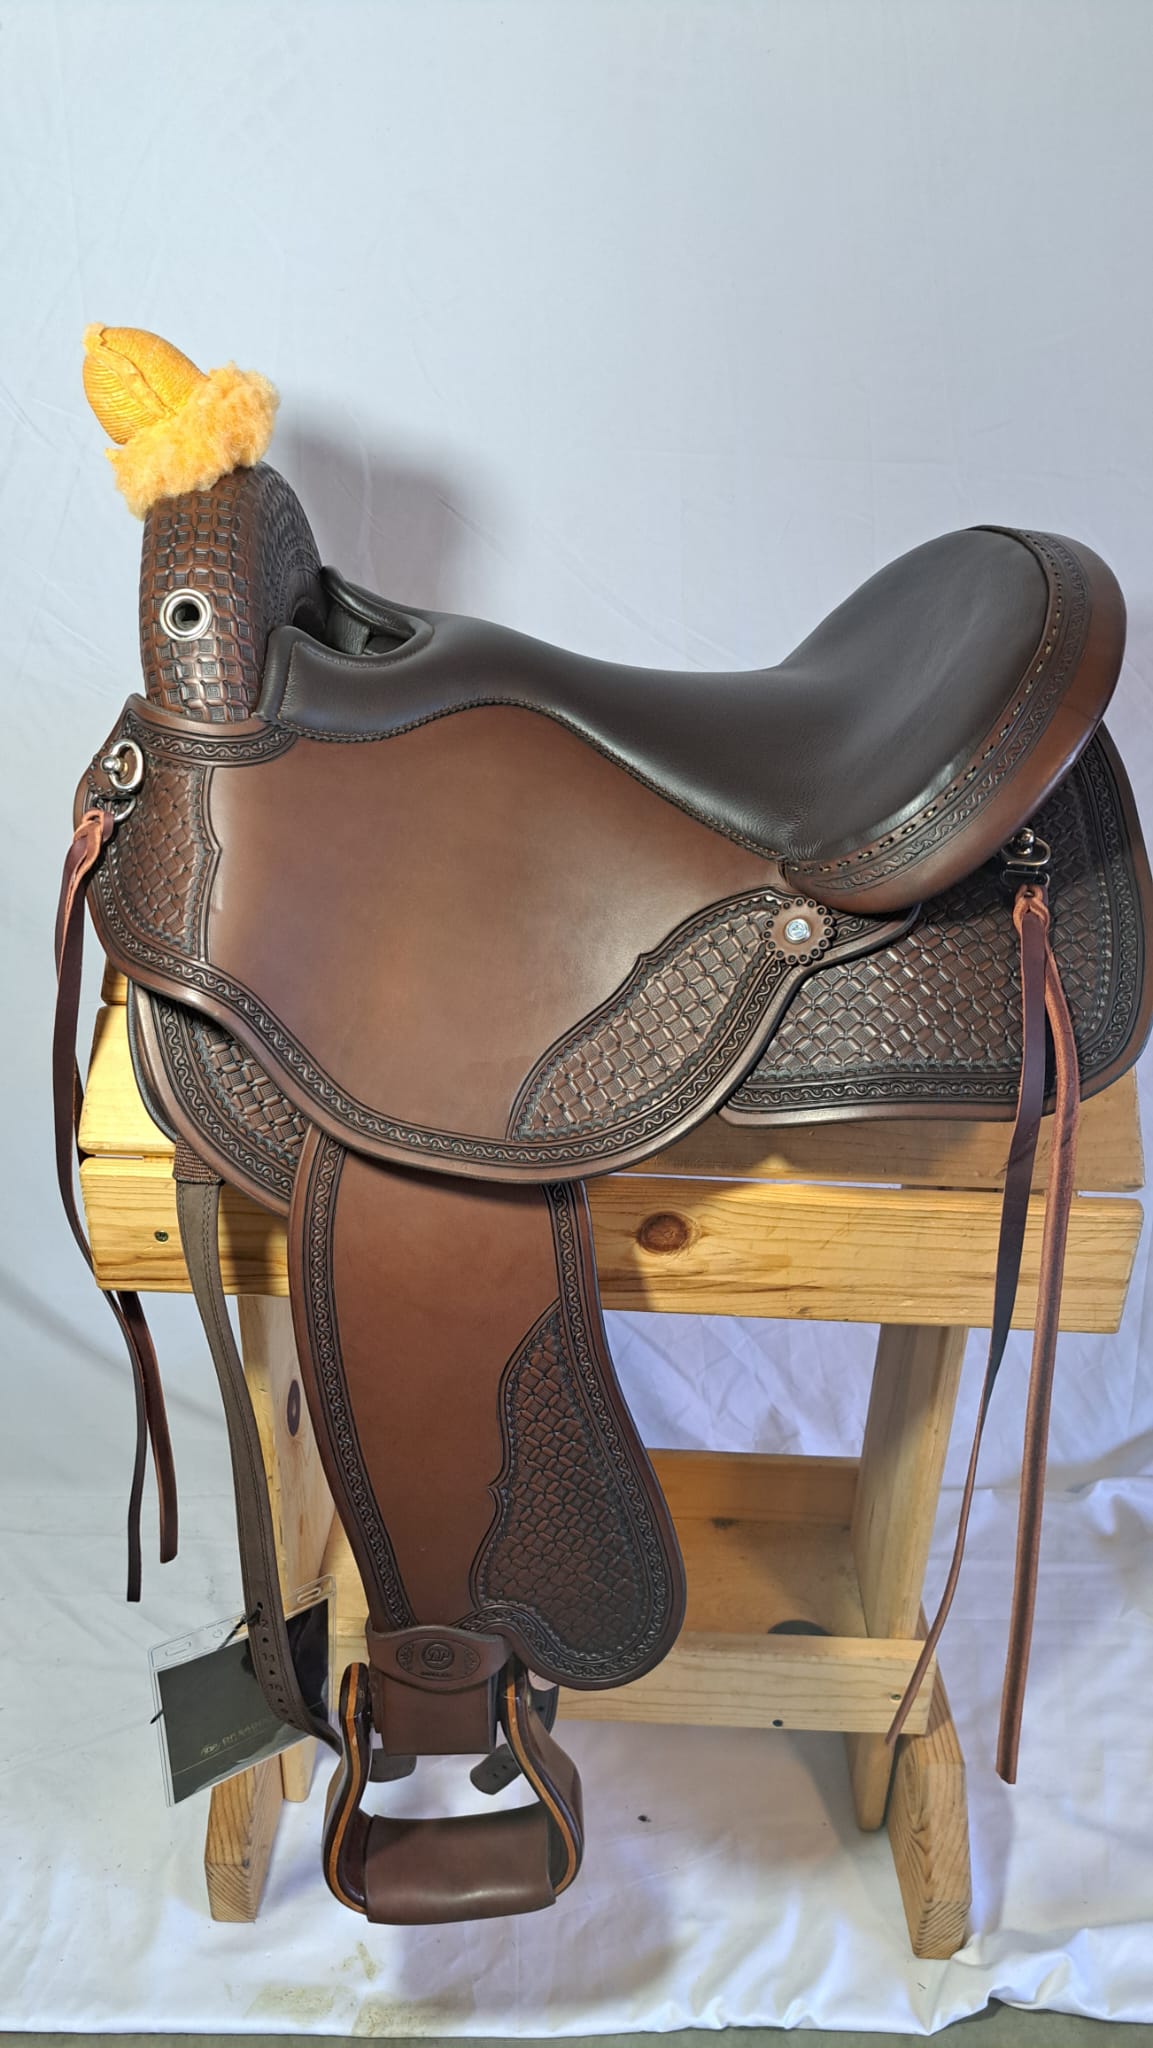 DP Saddlery Quantum Short and Light 7533 WD S2 With Western Skirt